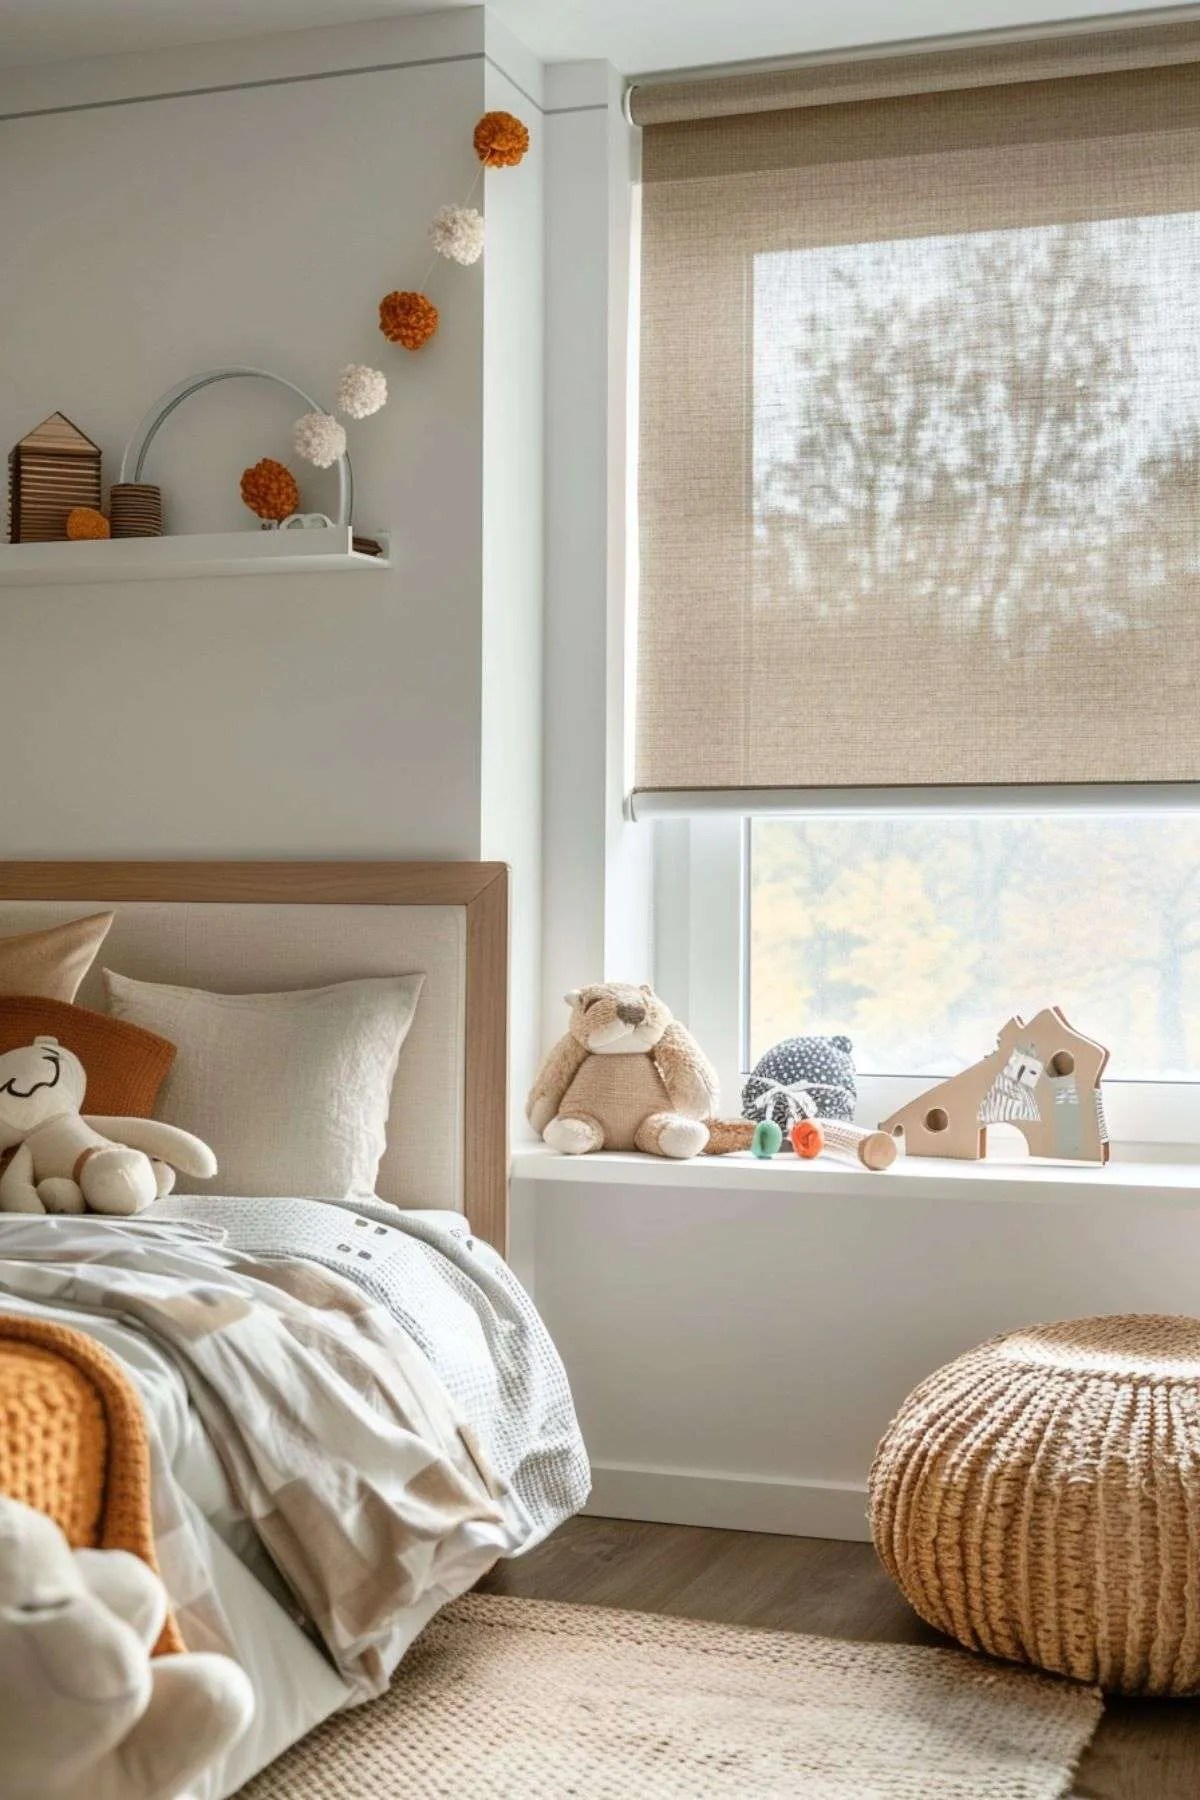 Bedroom Window Treatments: Elevate Your Kids’ Space with Safety in Mind